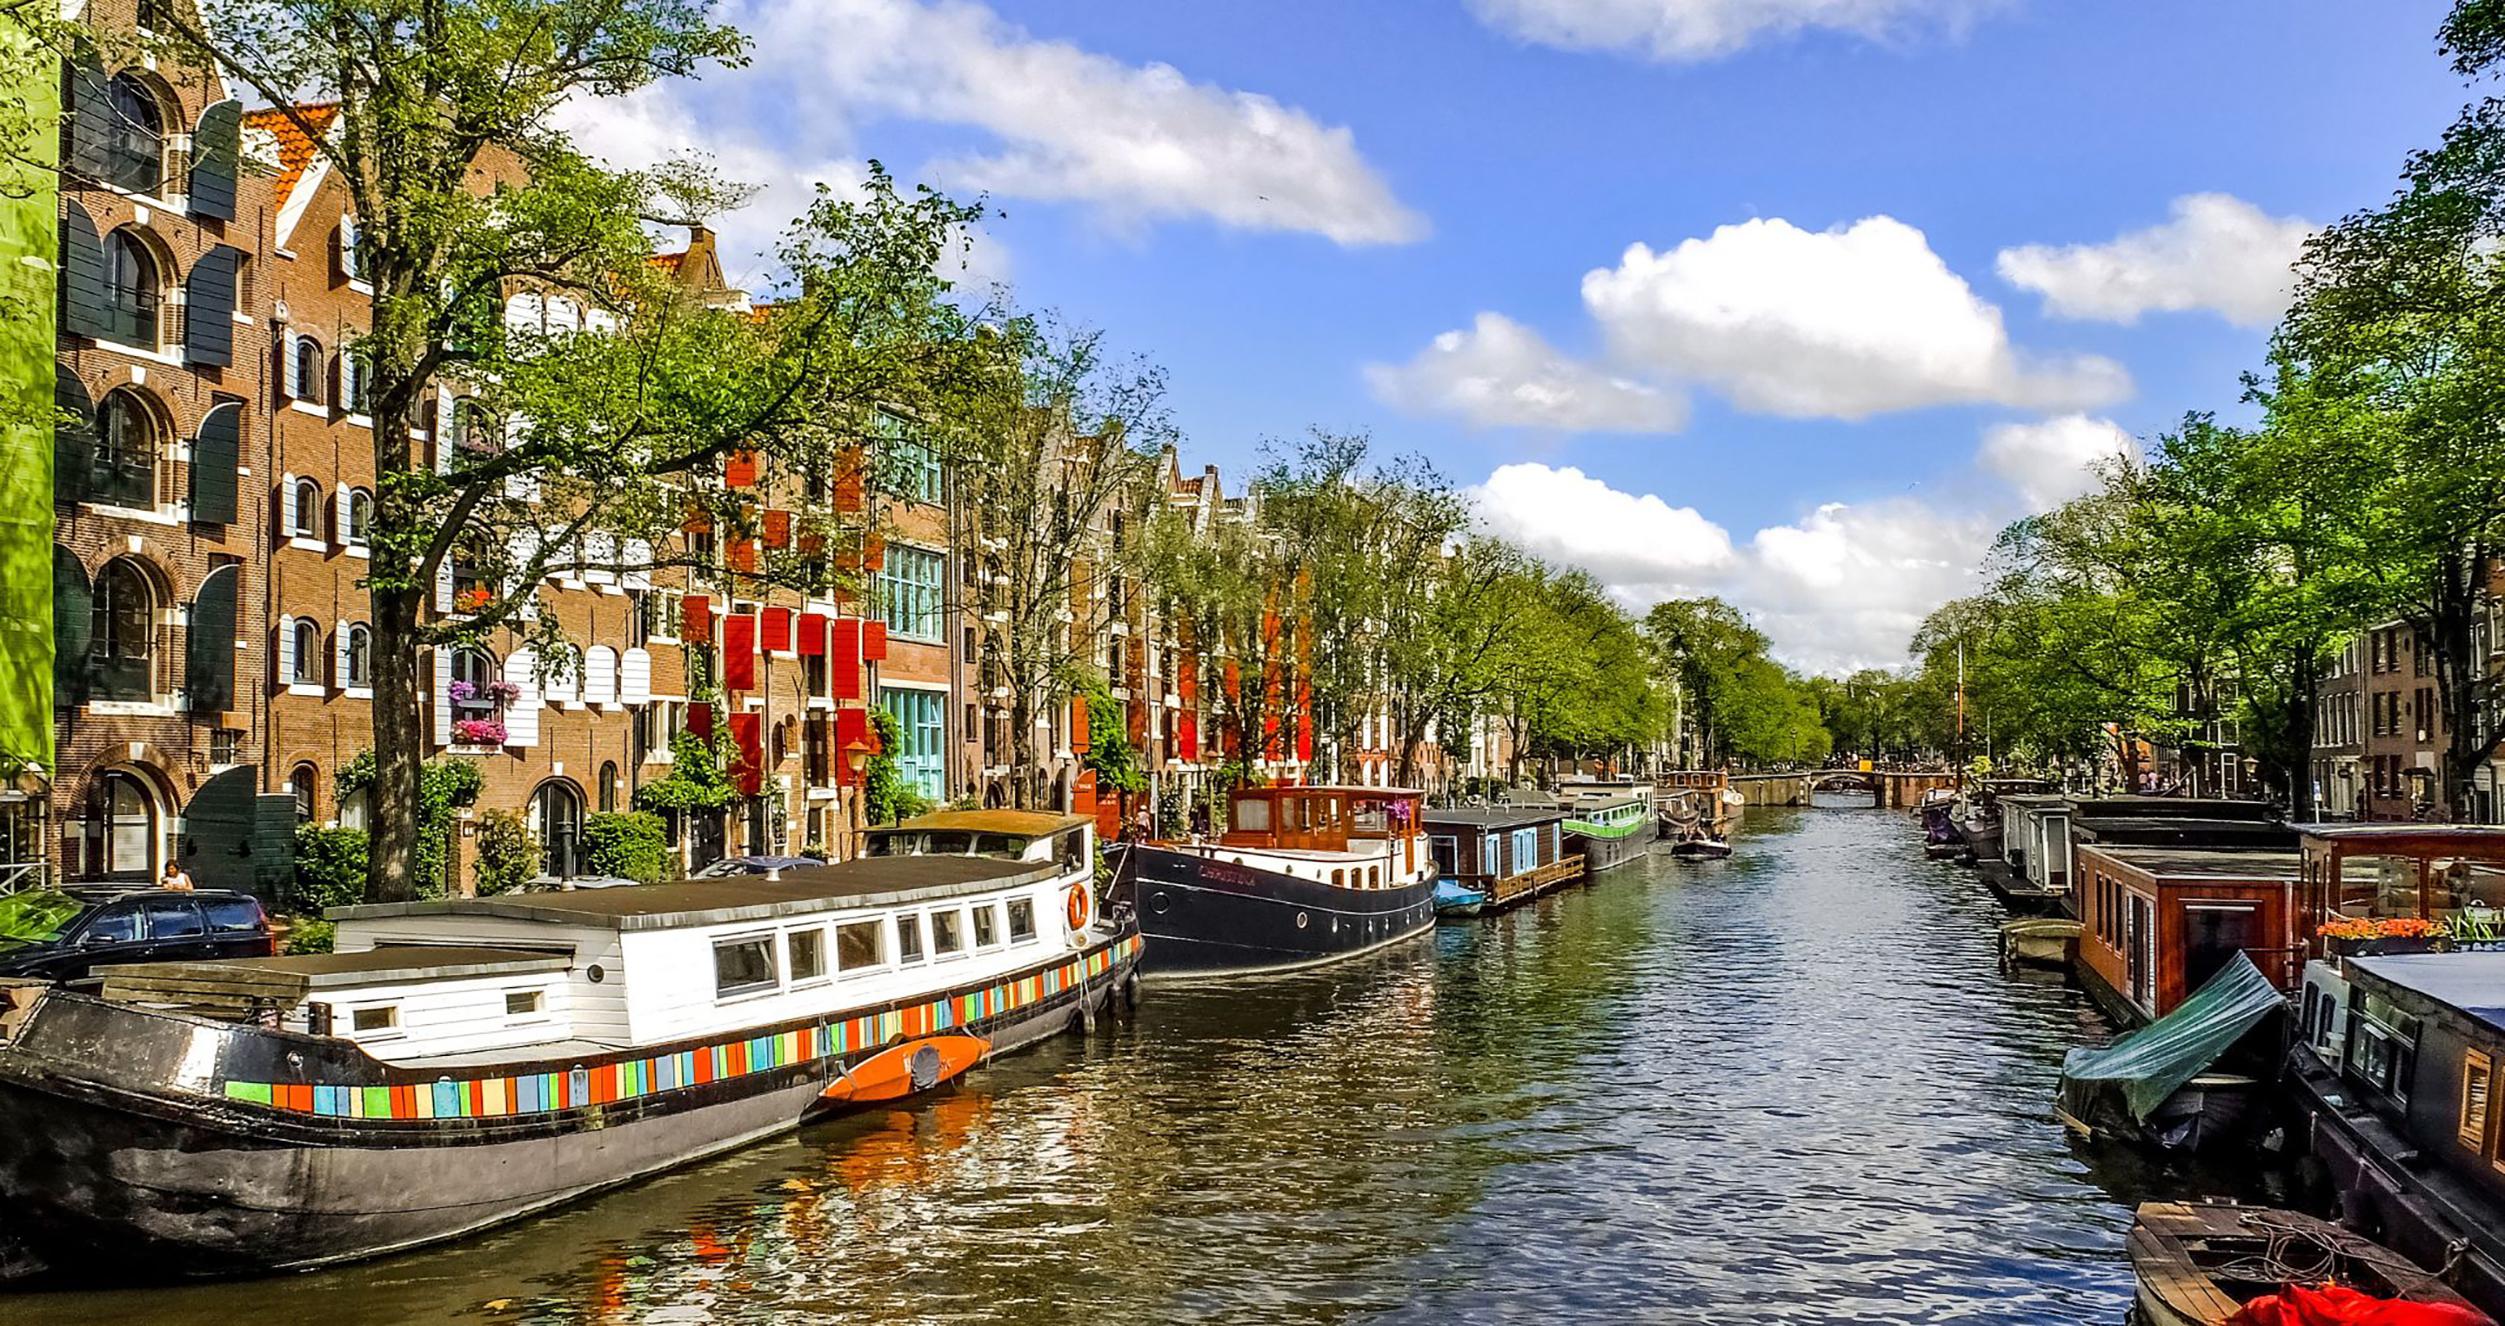 Image of canal in the Netherlands lined with boats, trees and buildings 